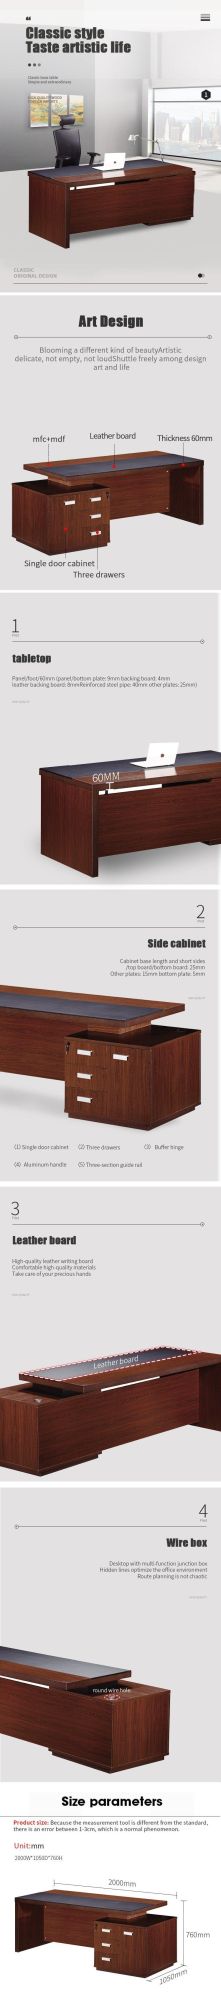 Home Building Work I Shaped Table Classic Low Price Commercial Luxury Office Furniture Desk